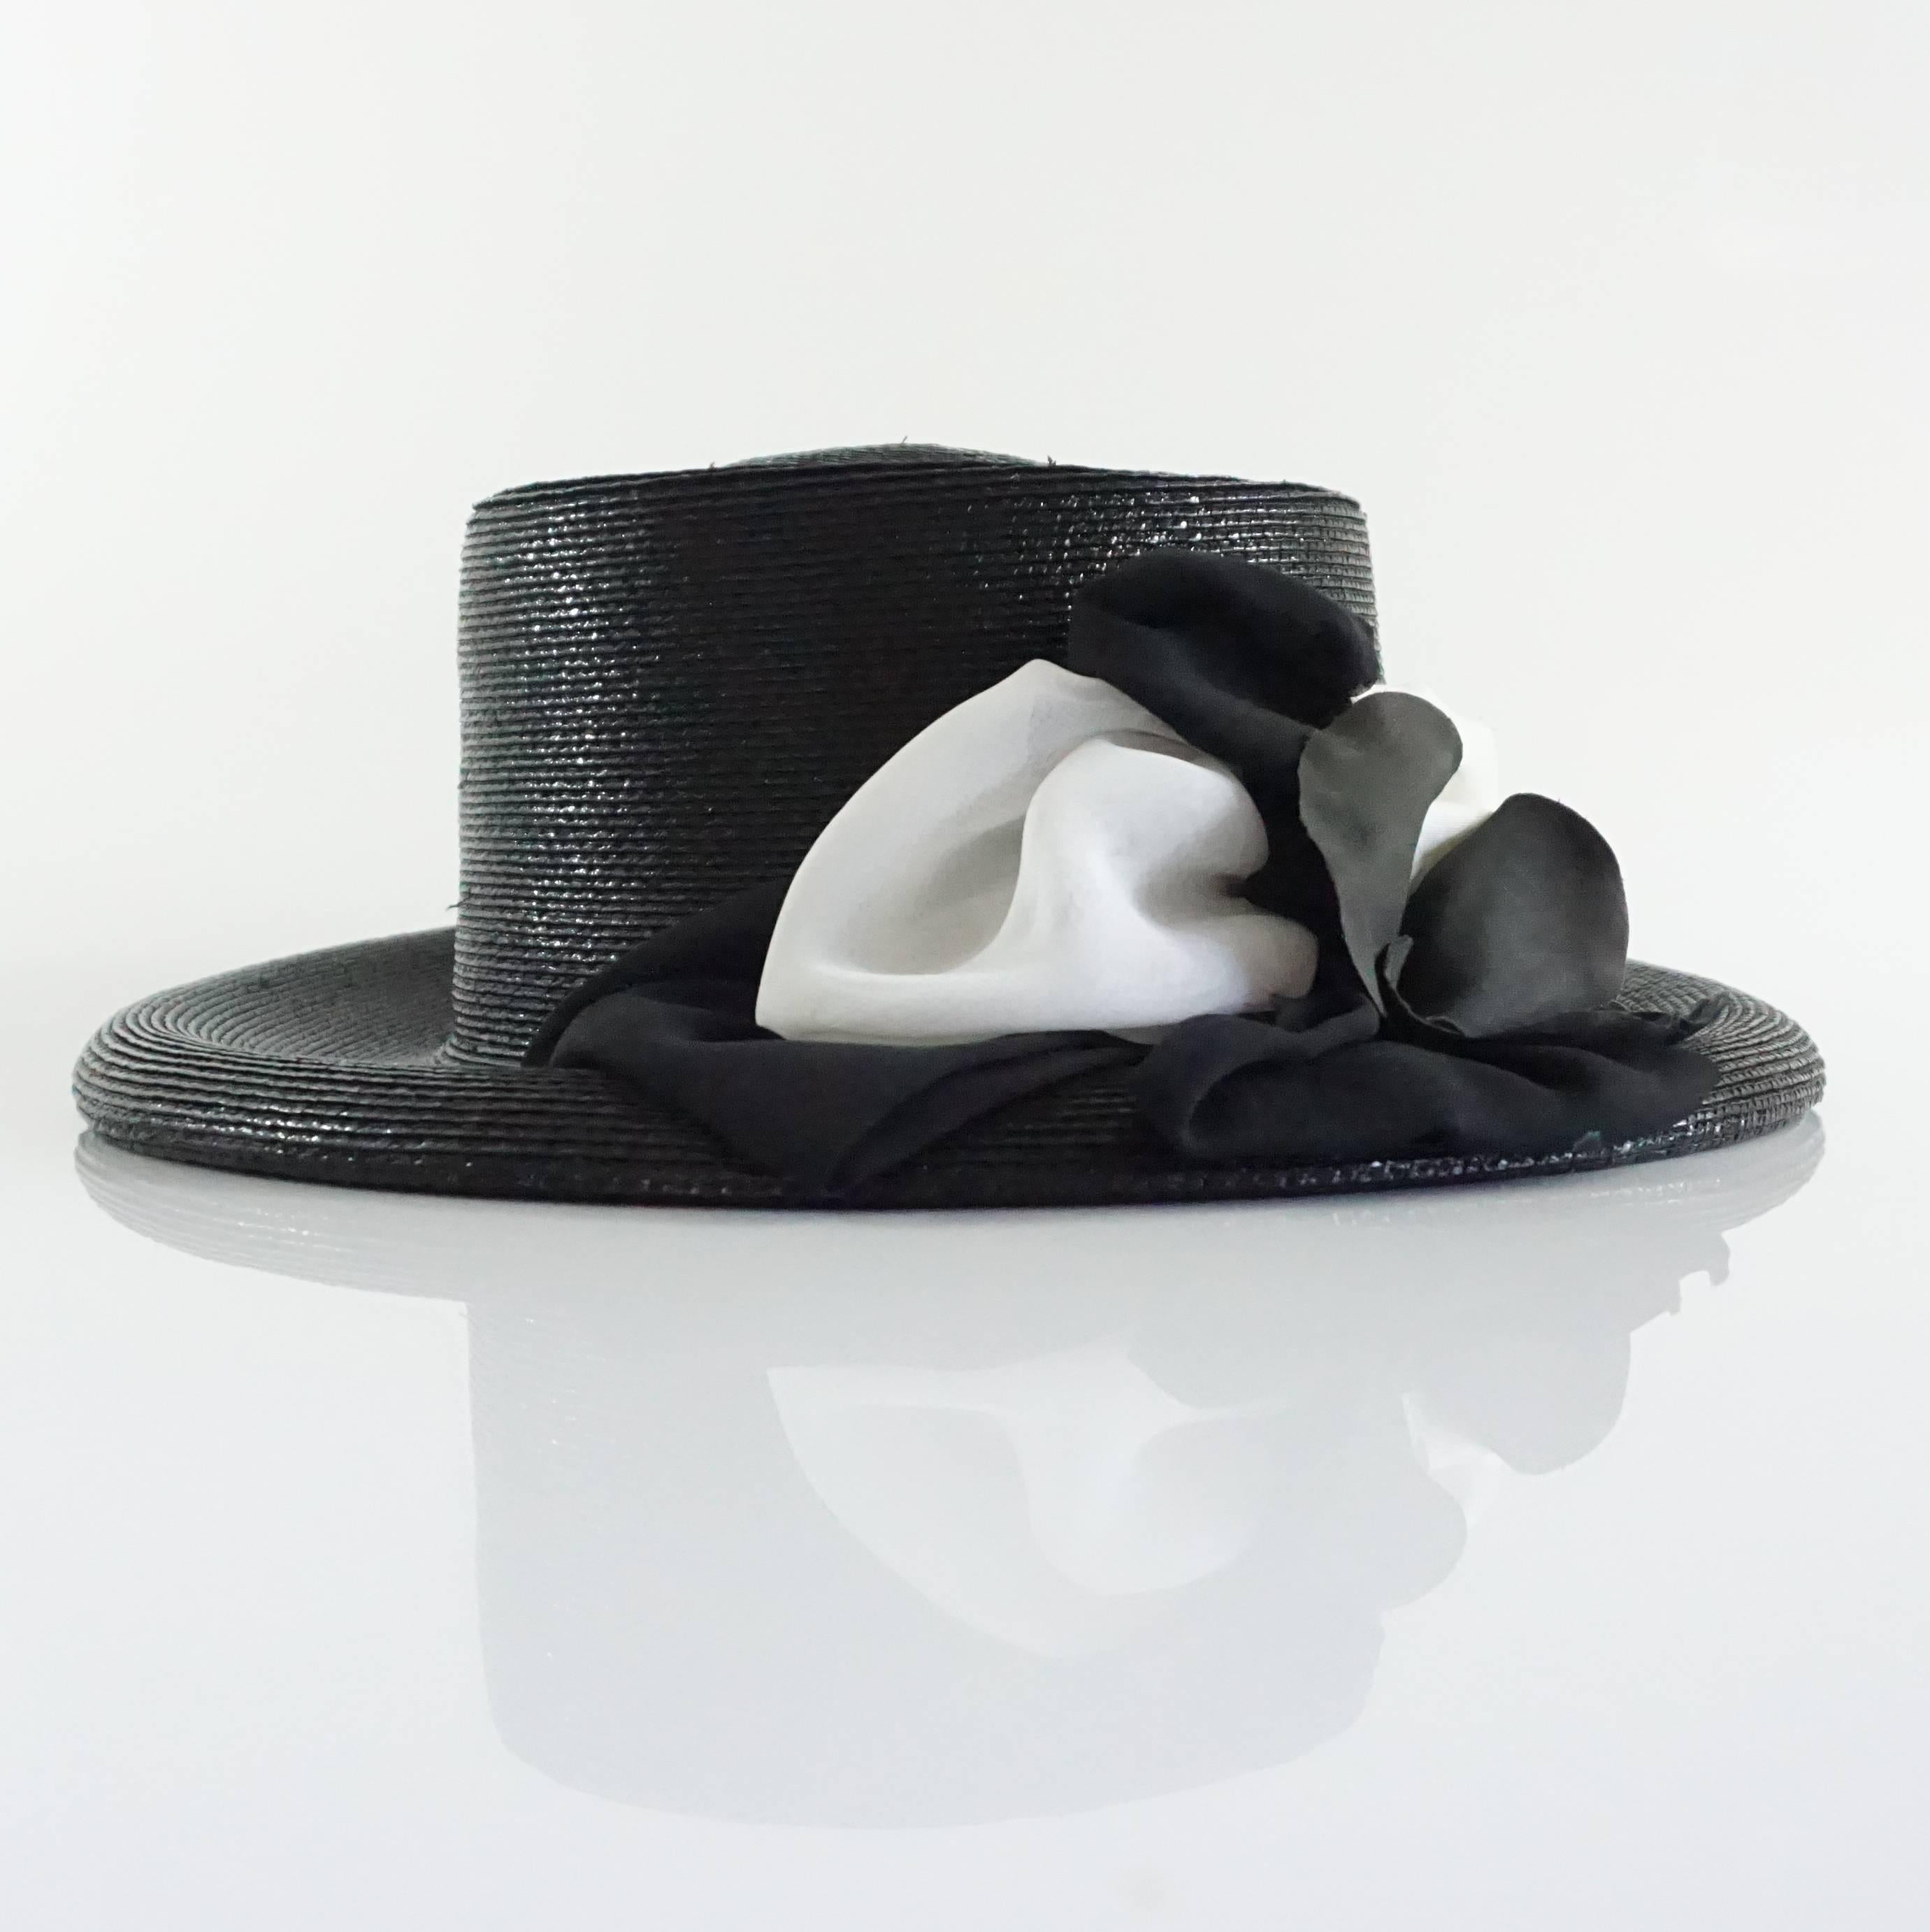 This Suzanne Couture Millinery hat is a black and glossy straw hat. The interior of the brim is white. On the outside, there is a black and white ribbon detailing along with a black and white silk flower. This hat is in excellent